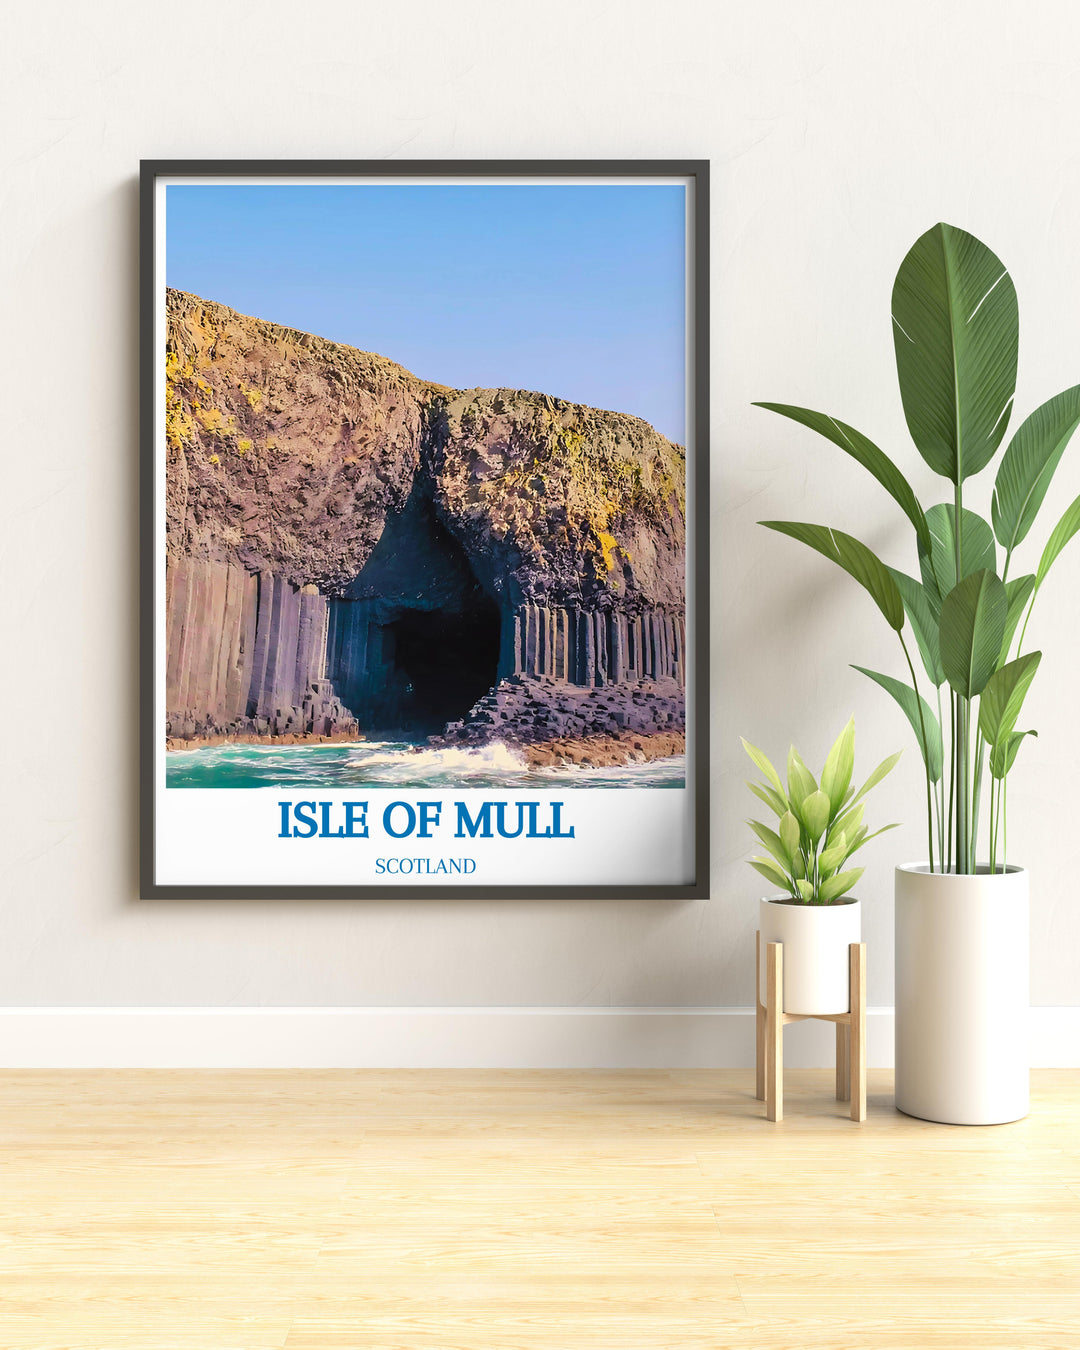 Travel poster of Scotland highlighting the Isle of Mull and its iconic landscapes perfect for travel enthusiasts and lovers of nature